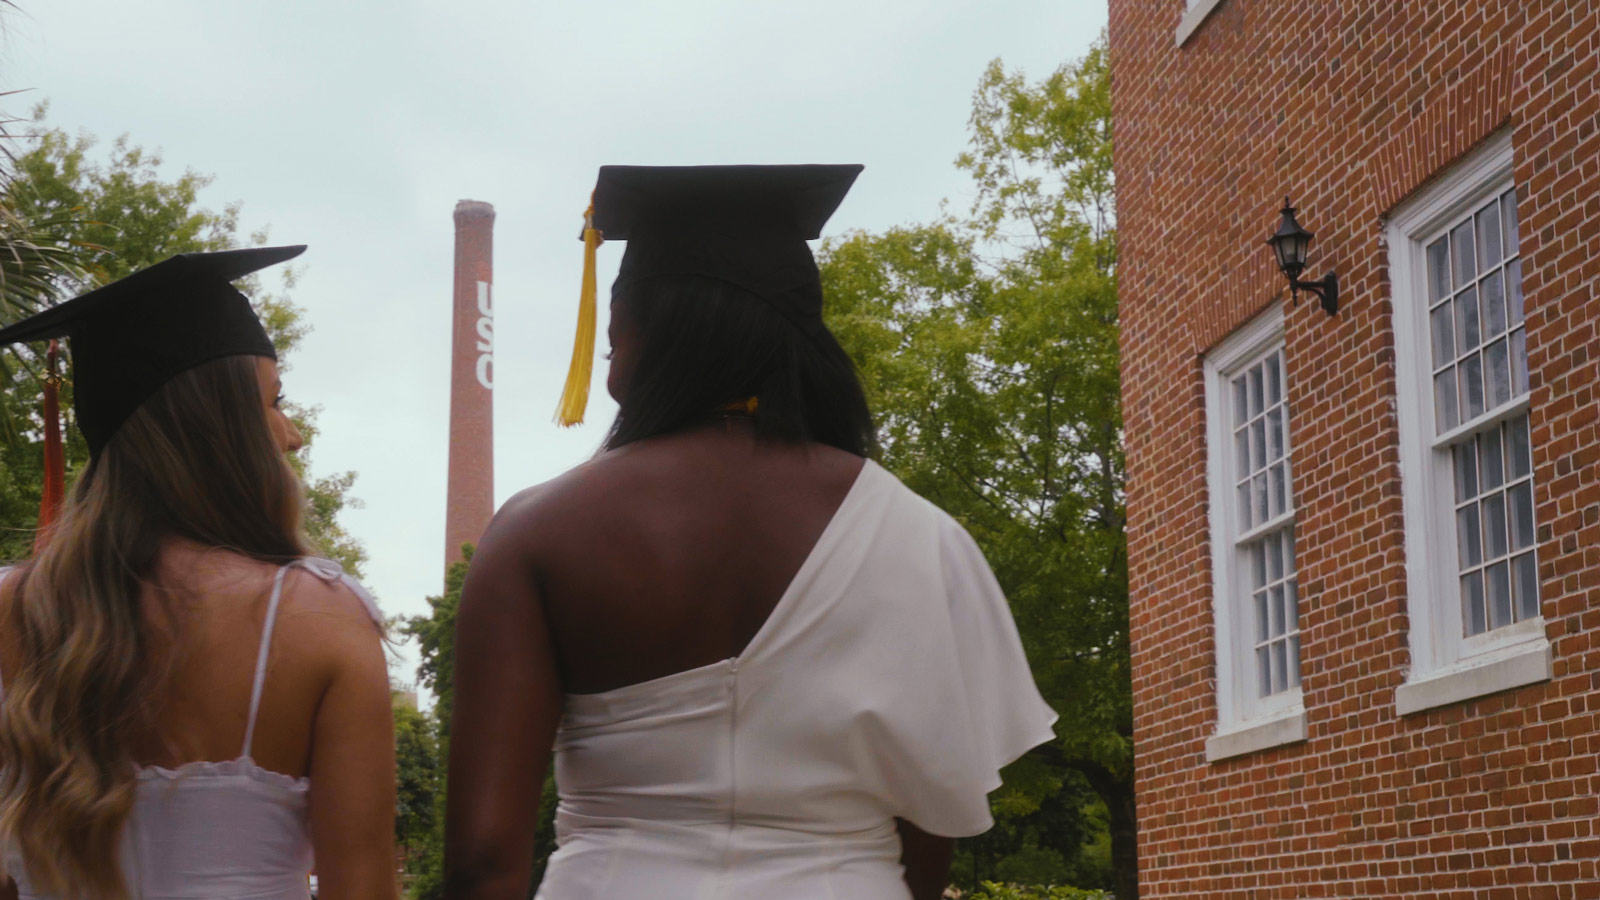 A view of two students from the back wearing graduation caps smiling at each other walking down a path on campus with the USC smokestack in the distance.